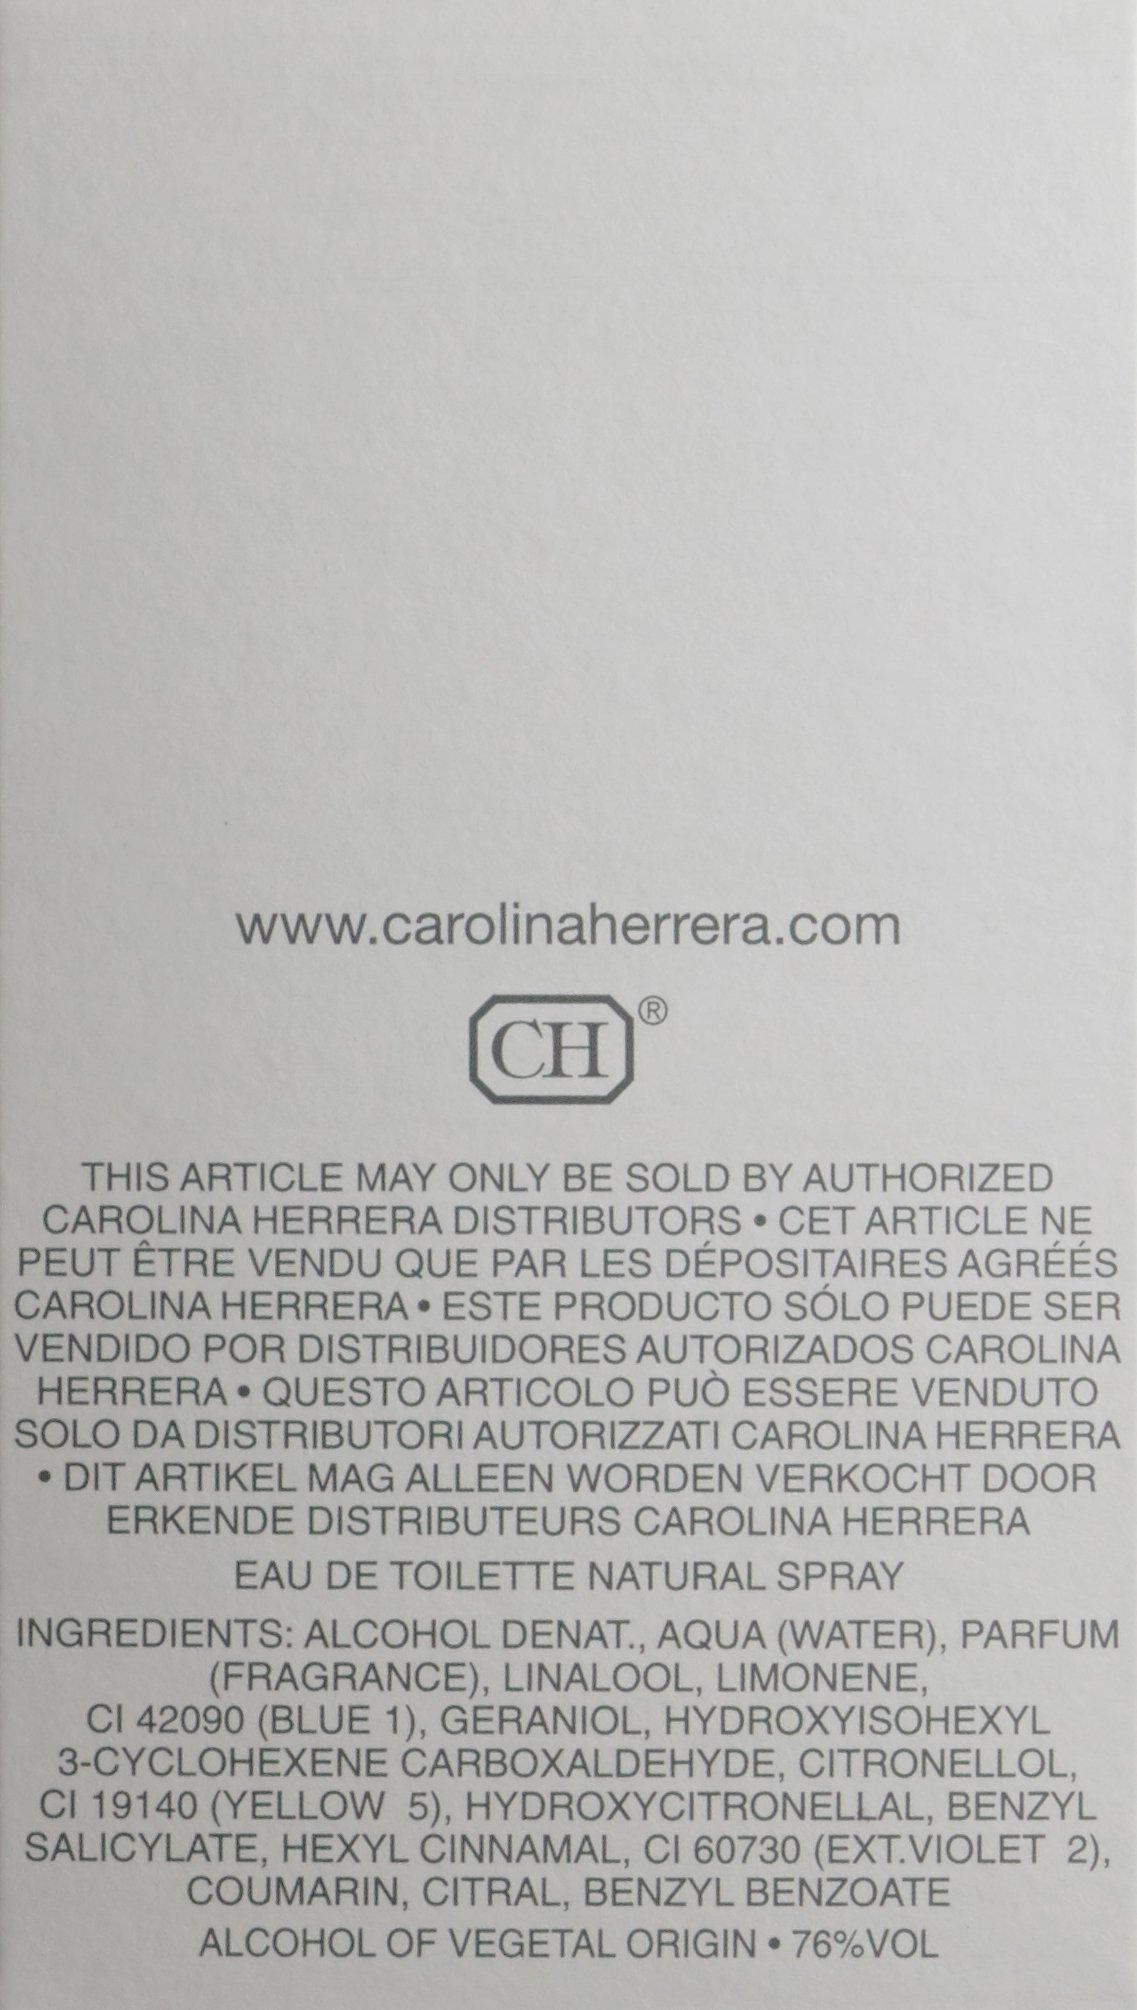 Carolina Herrera 212 Men Fragrance For Men - Timeless Scent - Warm Sandalwood - Fresh Notes - Beautifully Bright Fragrance - Energetic Green With Sensual Peppery Spices - Edt Spray - 1.7 Oz